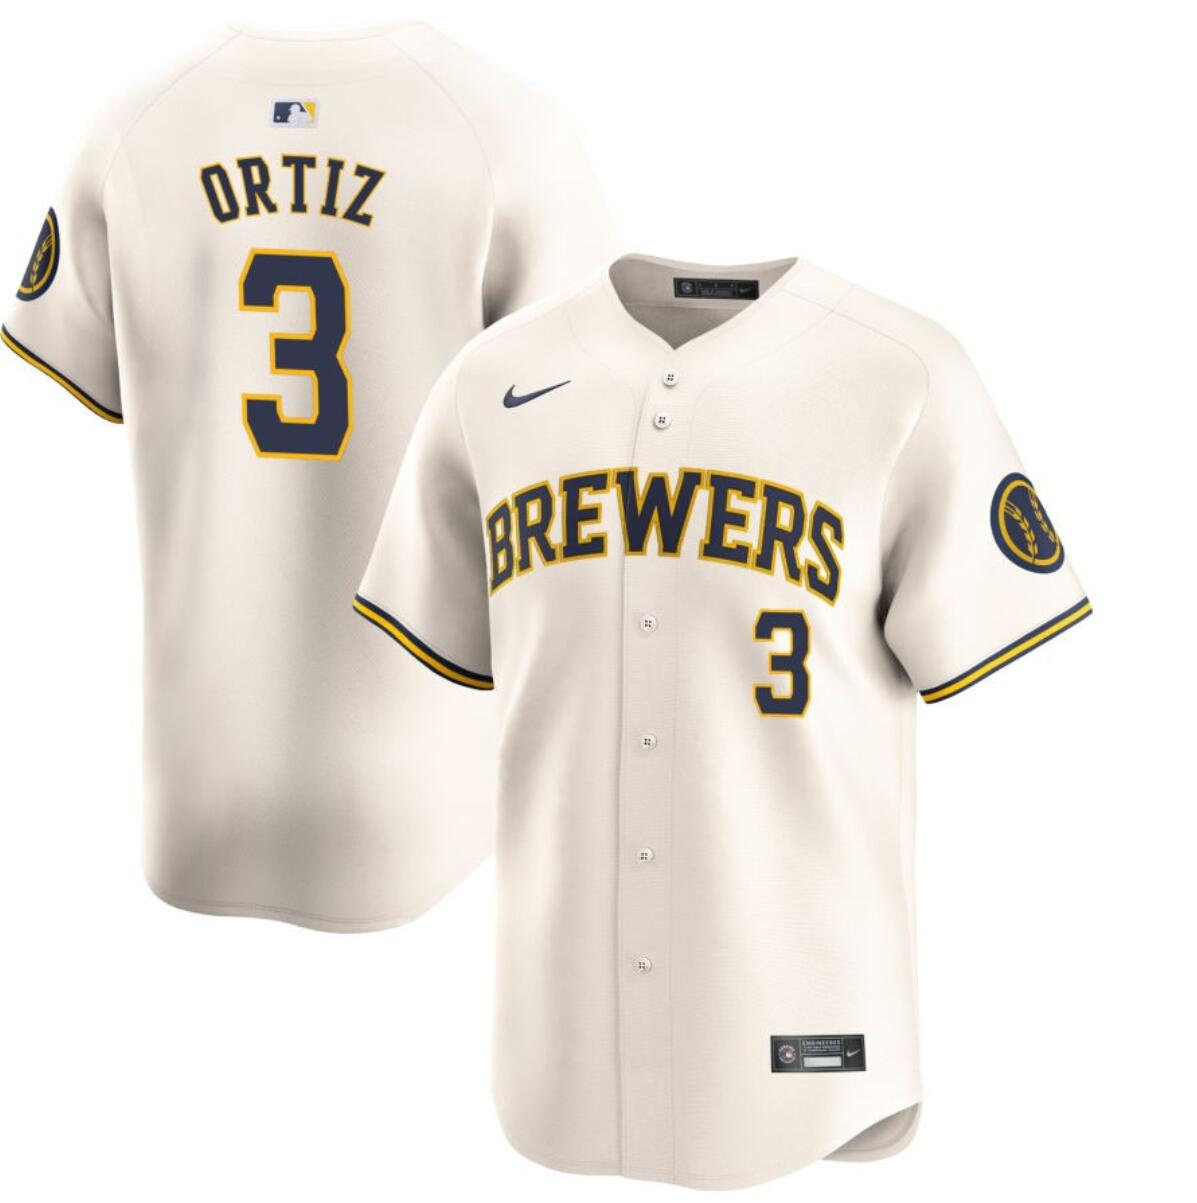 Men's Milwaukee Brewers #3 Joey Ortiz Cream Home Limited Stitched Baseball Jersey